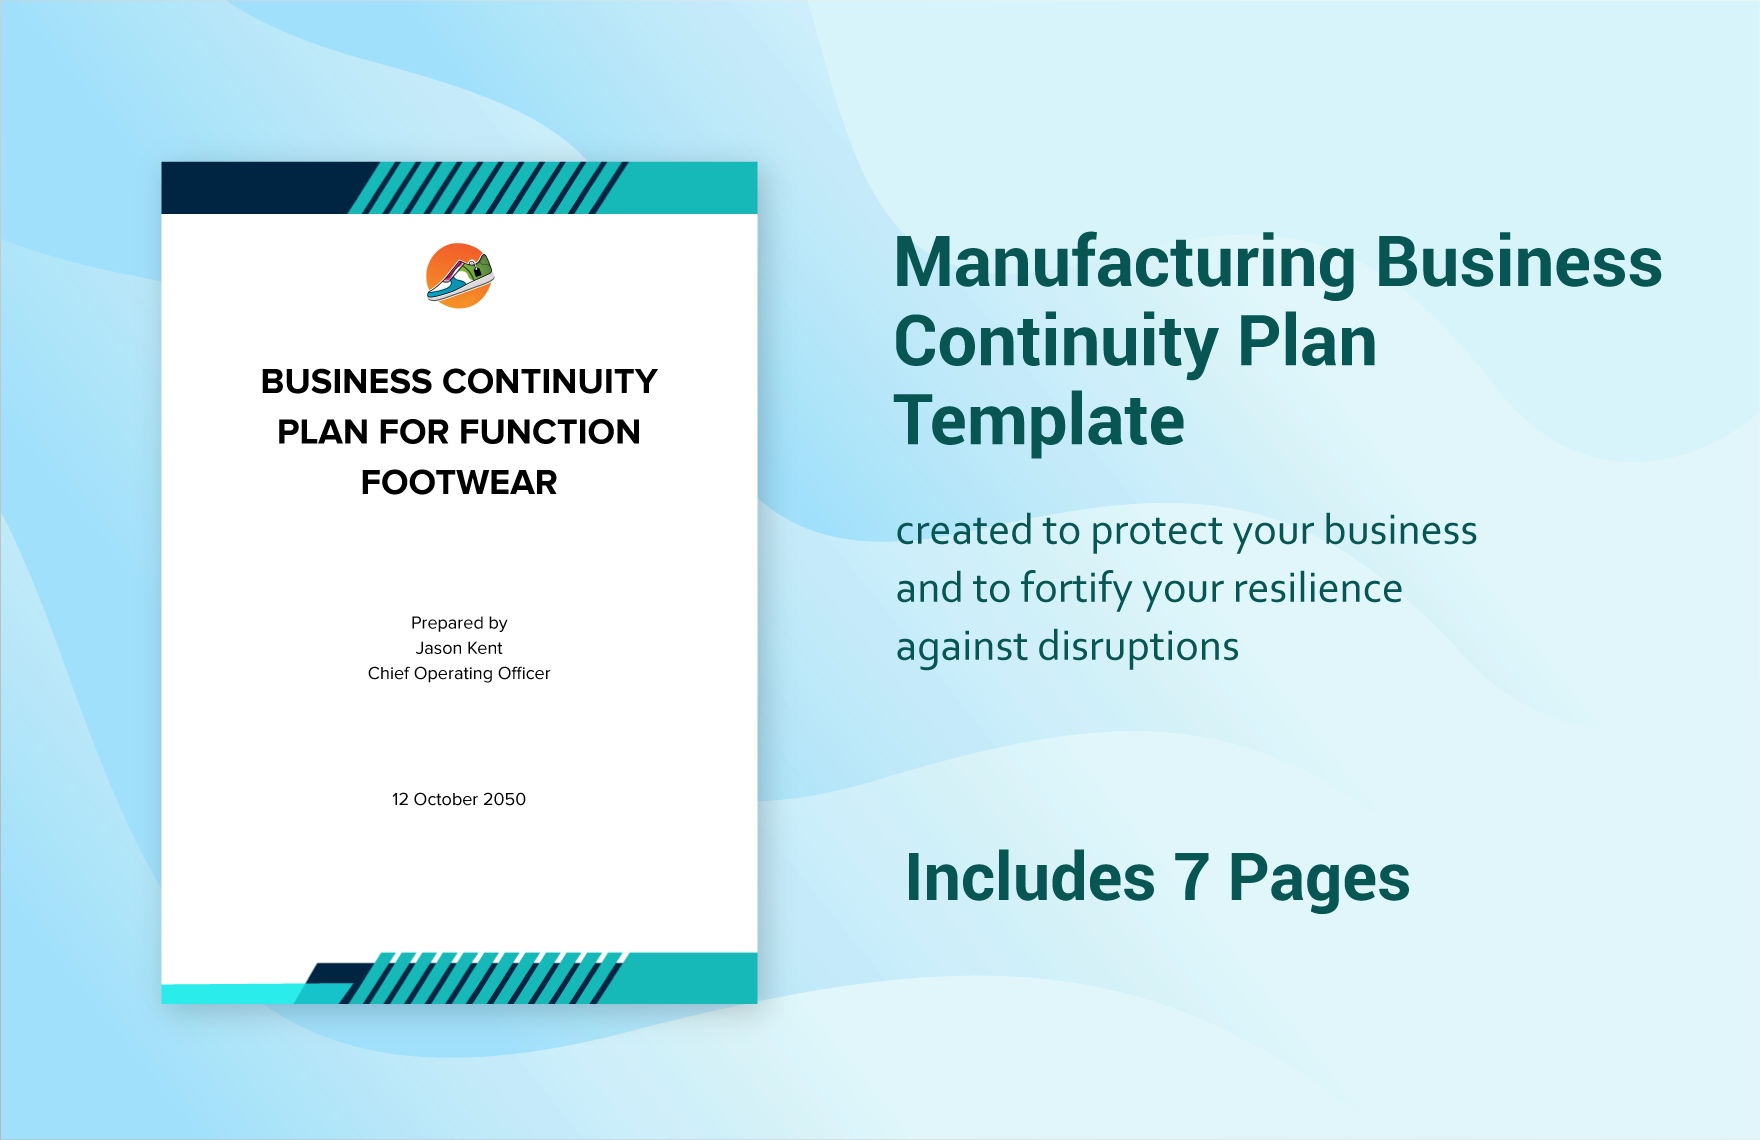 Free Manufacturing Business Continuity Plan Template in Word, Google Docs, PDF